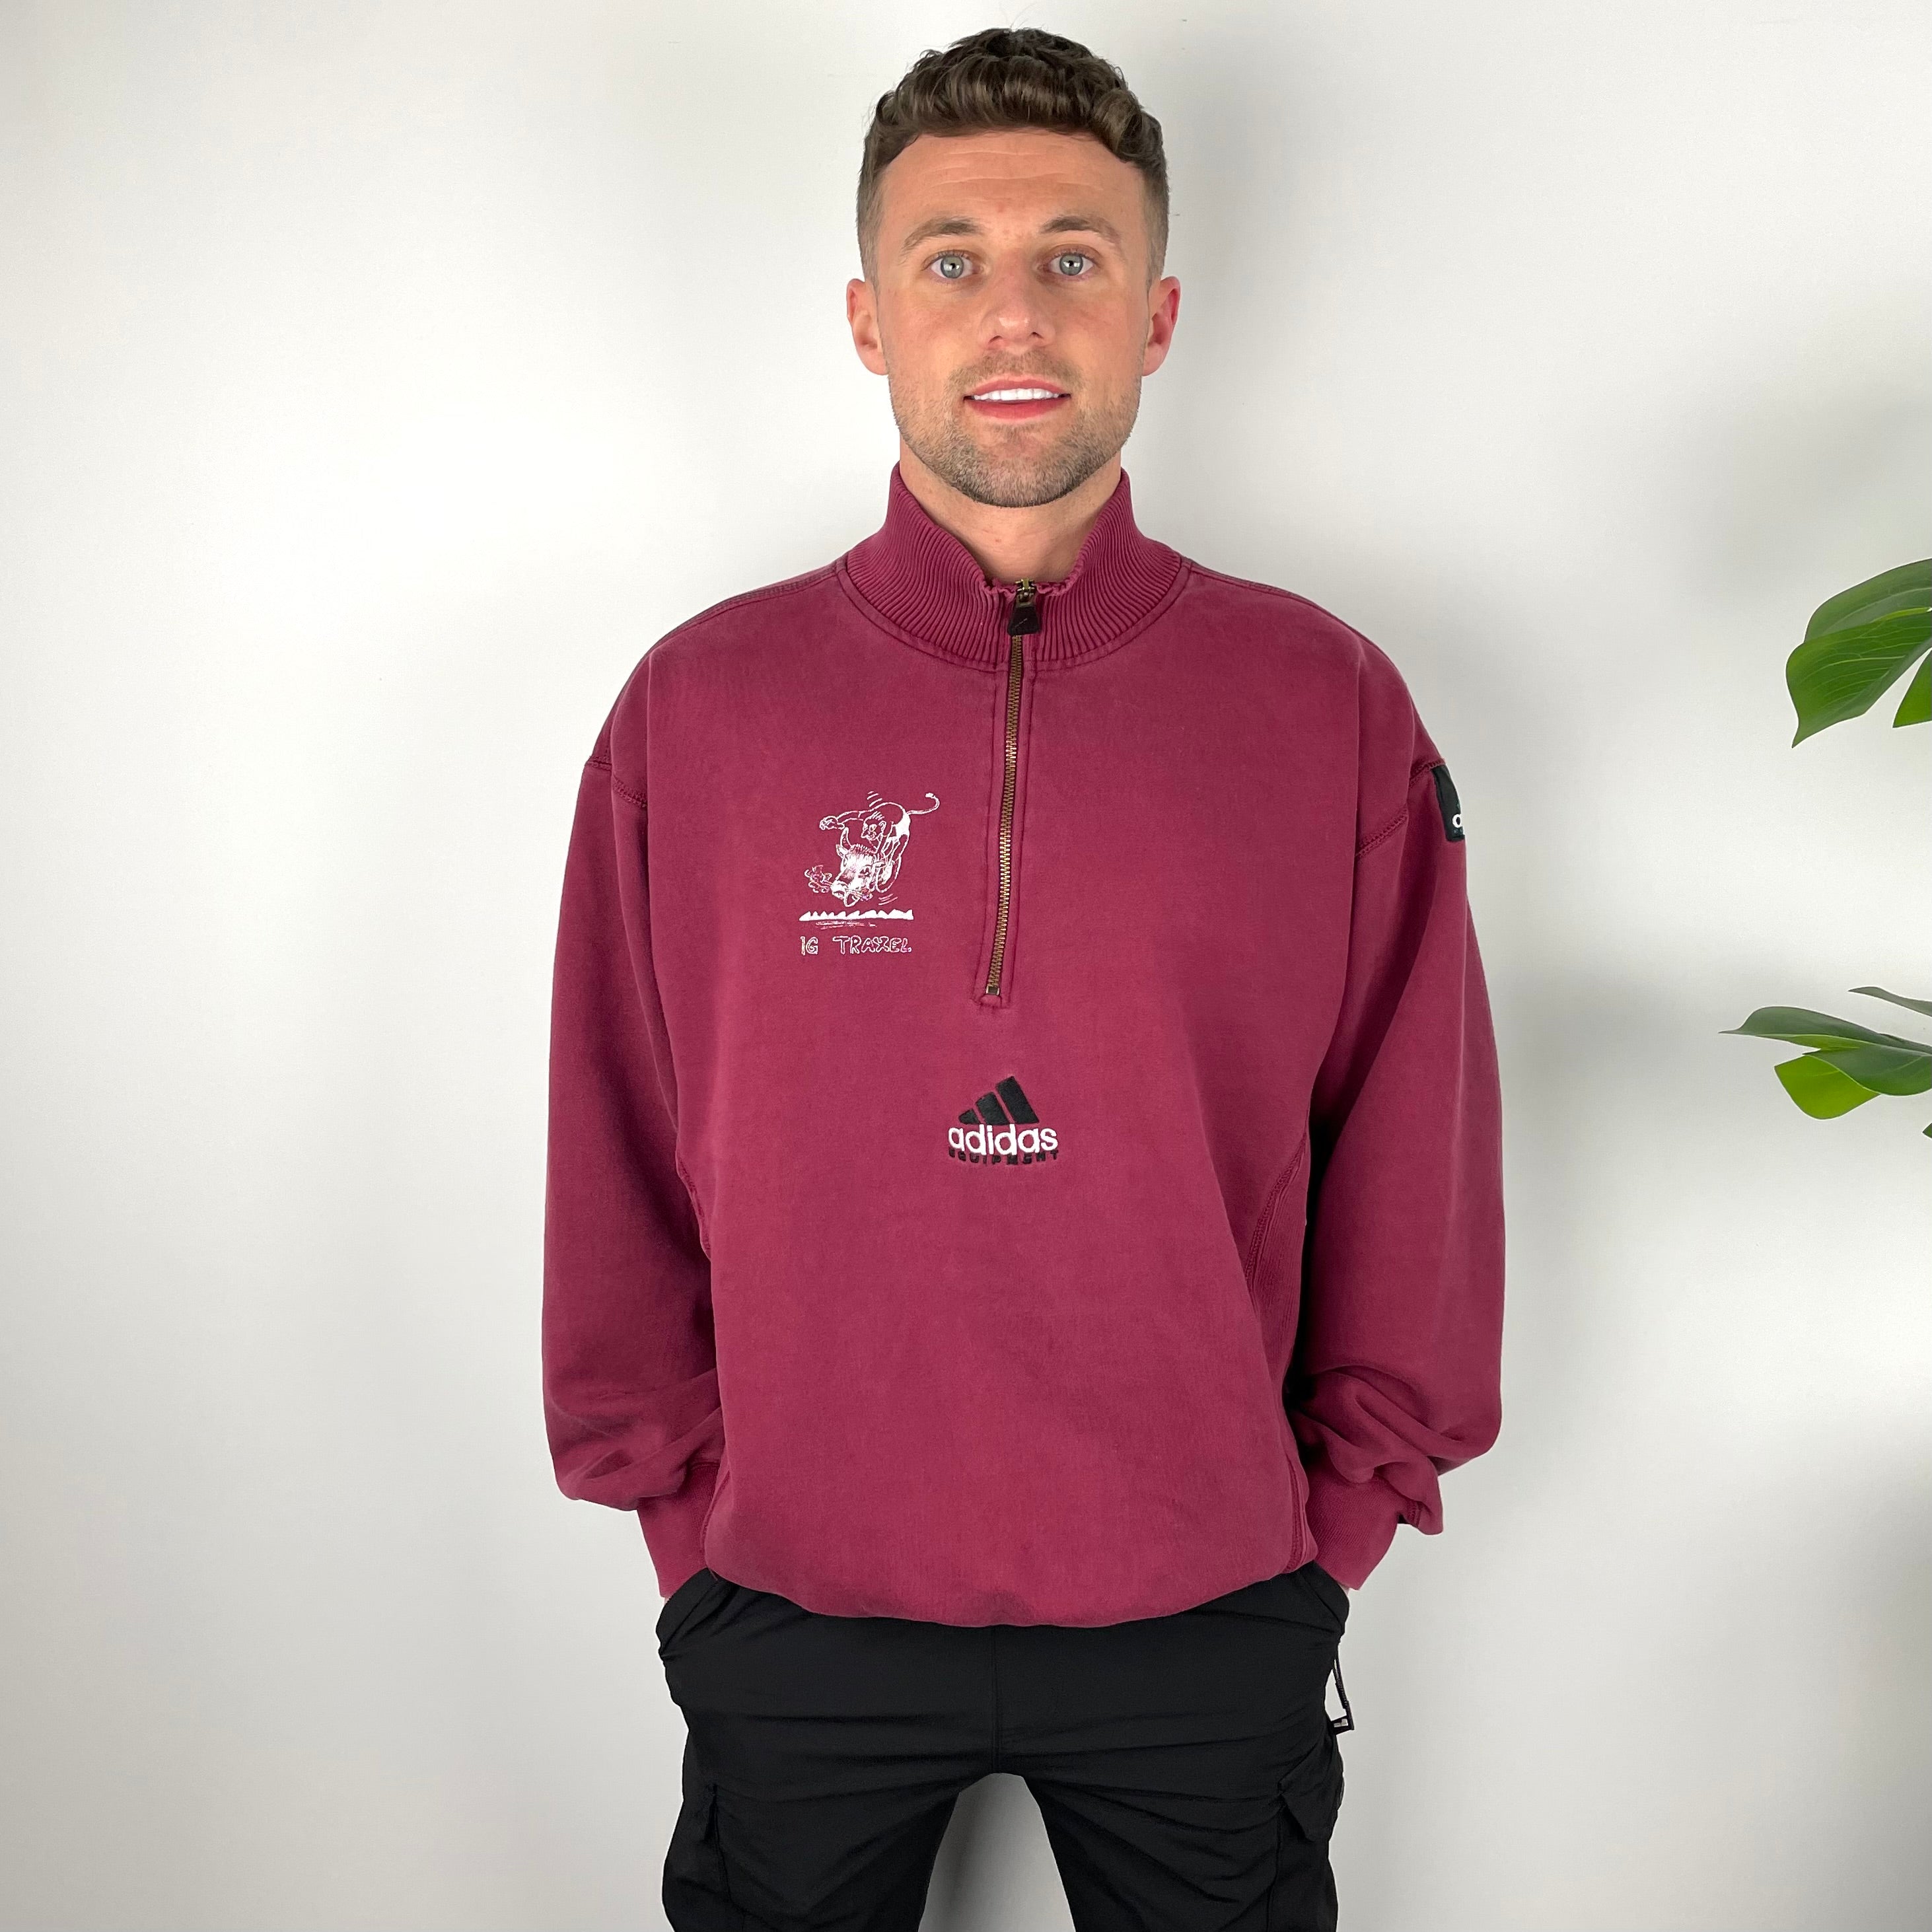 Adidas Equipment EQT RARE Maroon Embroidered Spell Out Quarter Zip Sweatshirt (XL)